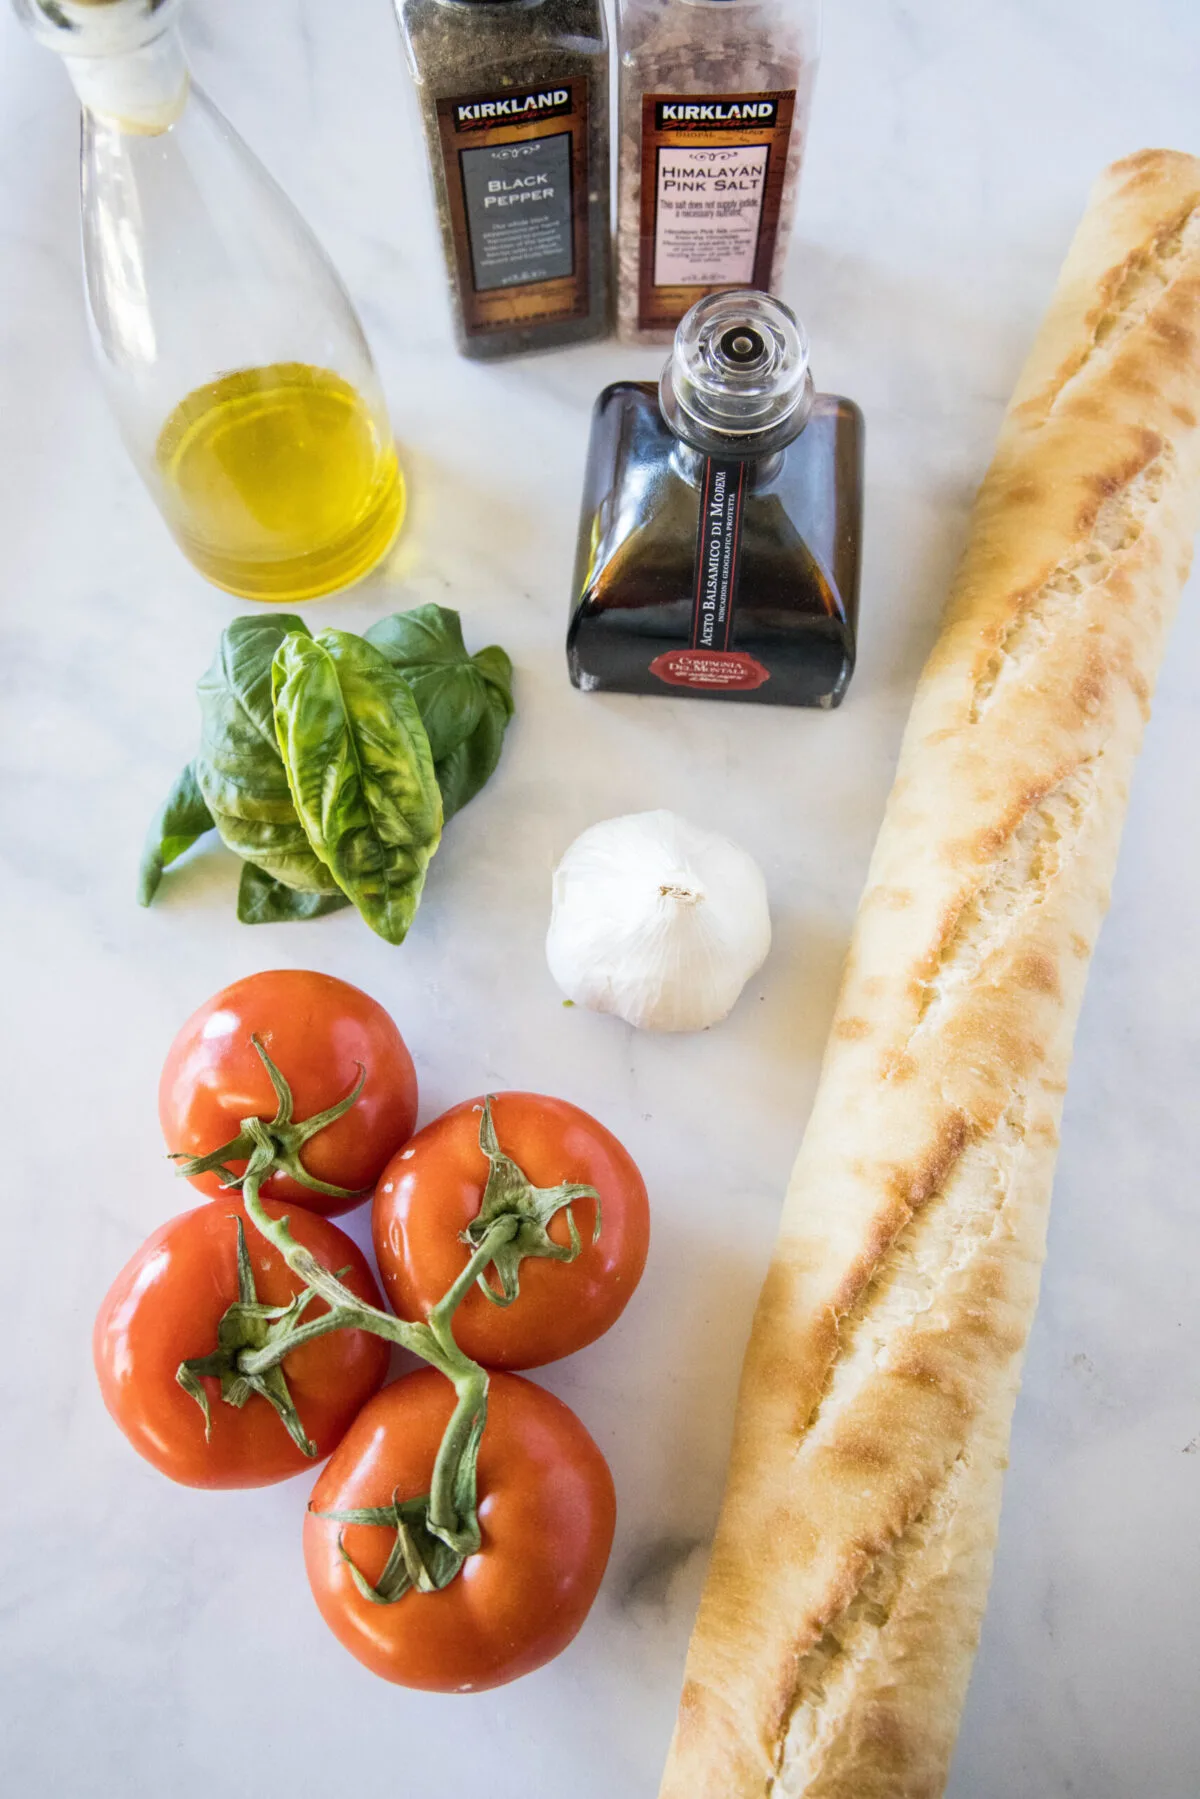 Overhead view of the ingredients needed for bruschetta: A baguette, four tomatoes on the vine, a head of garlic, a bunch of basil, a jar of balsamic vinegar, a bottle of olive oil, and salt and pepper